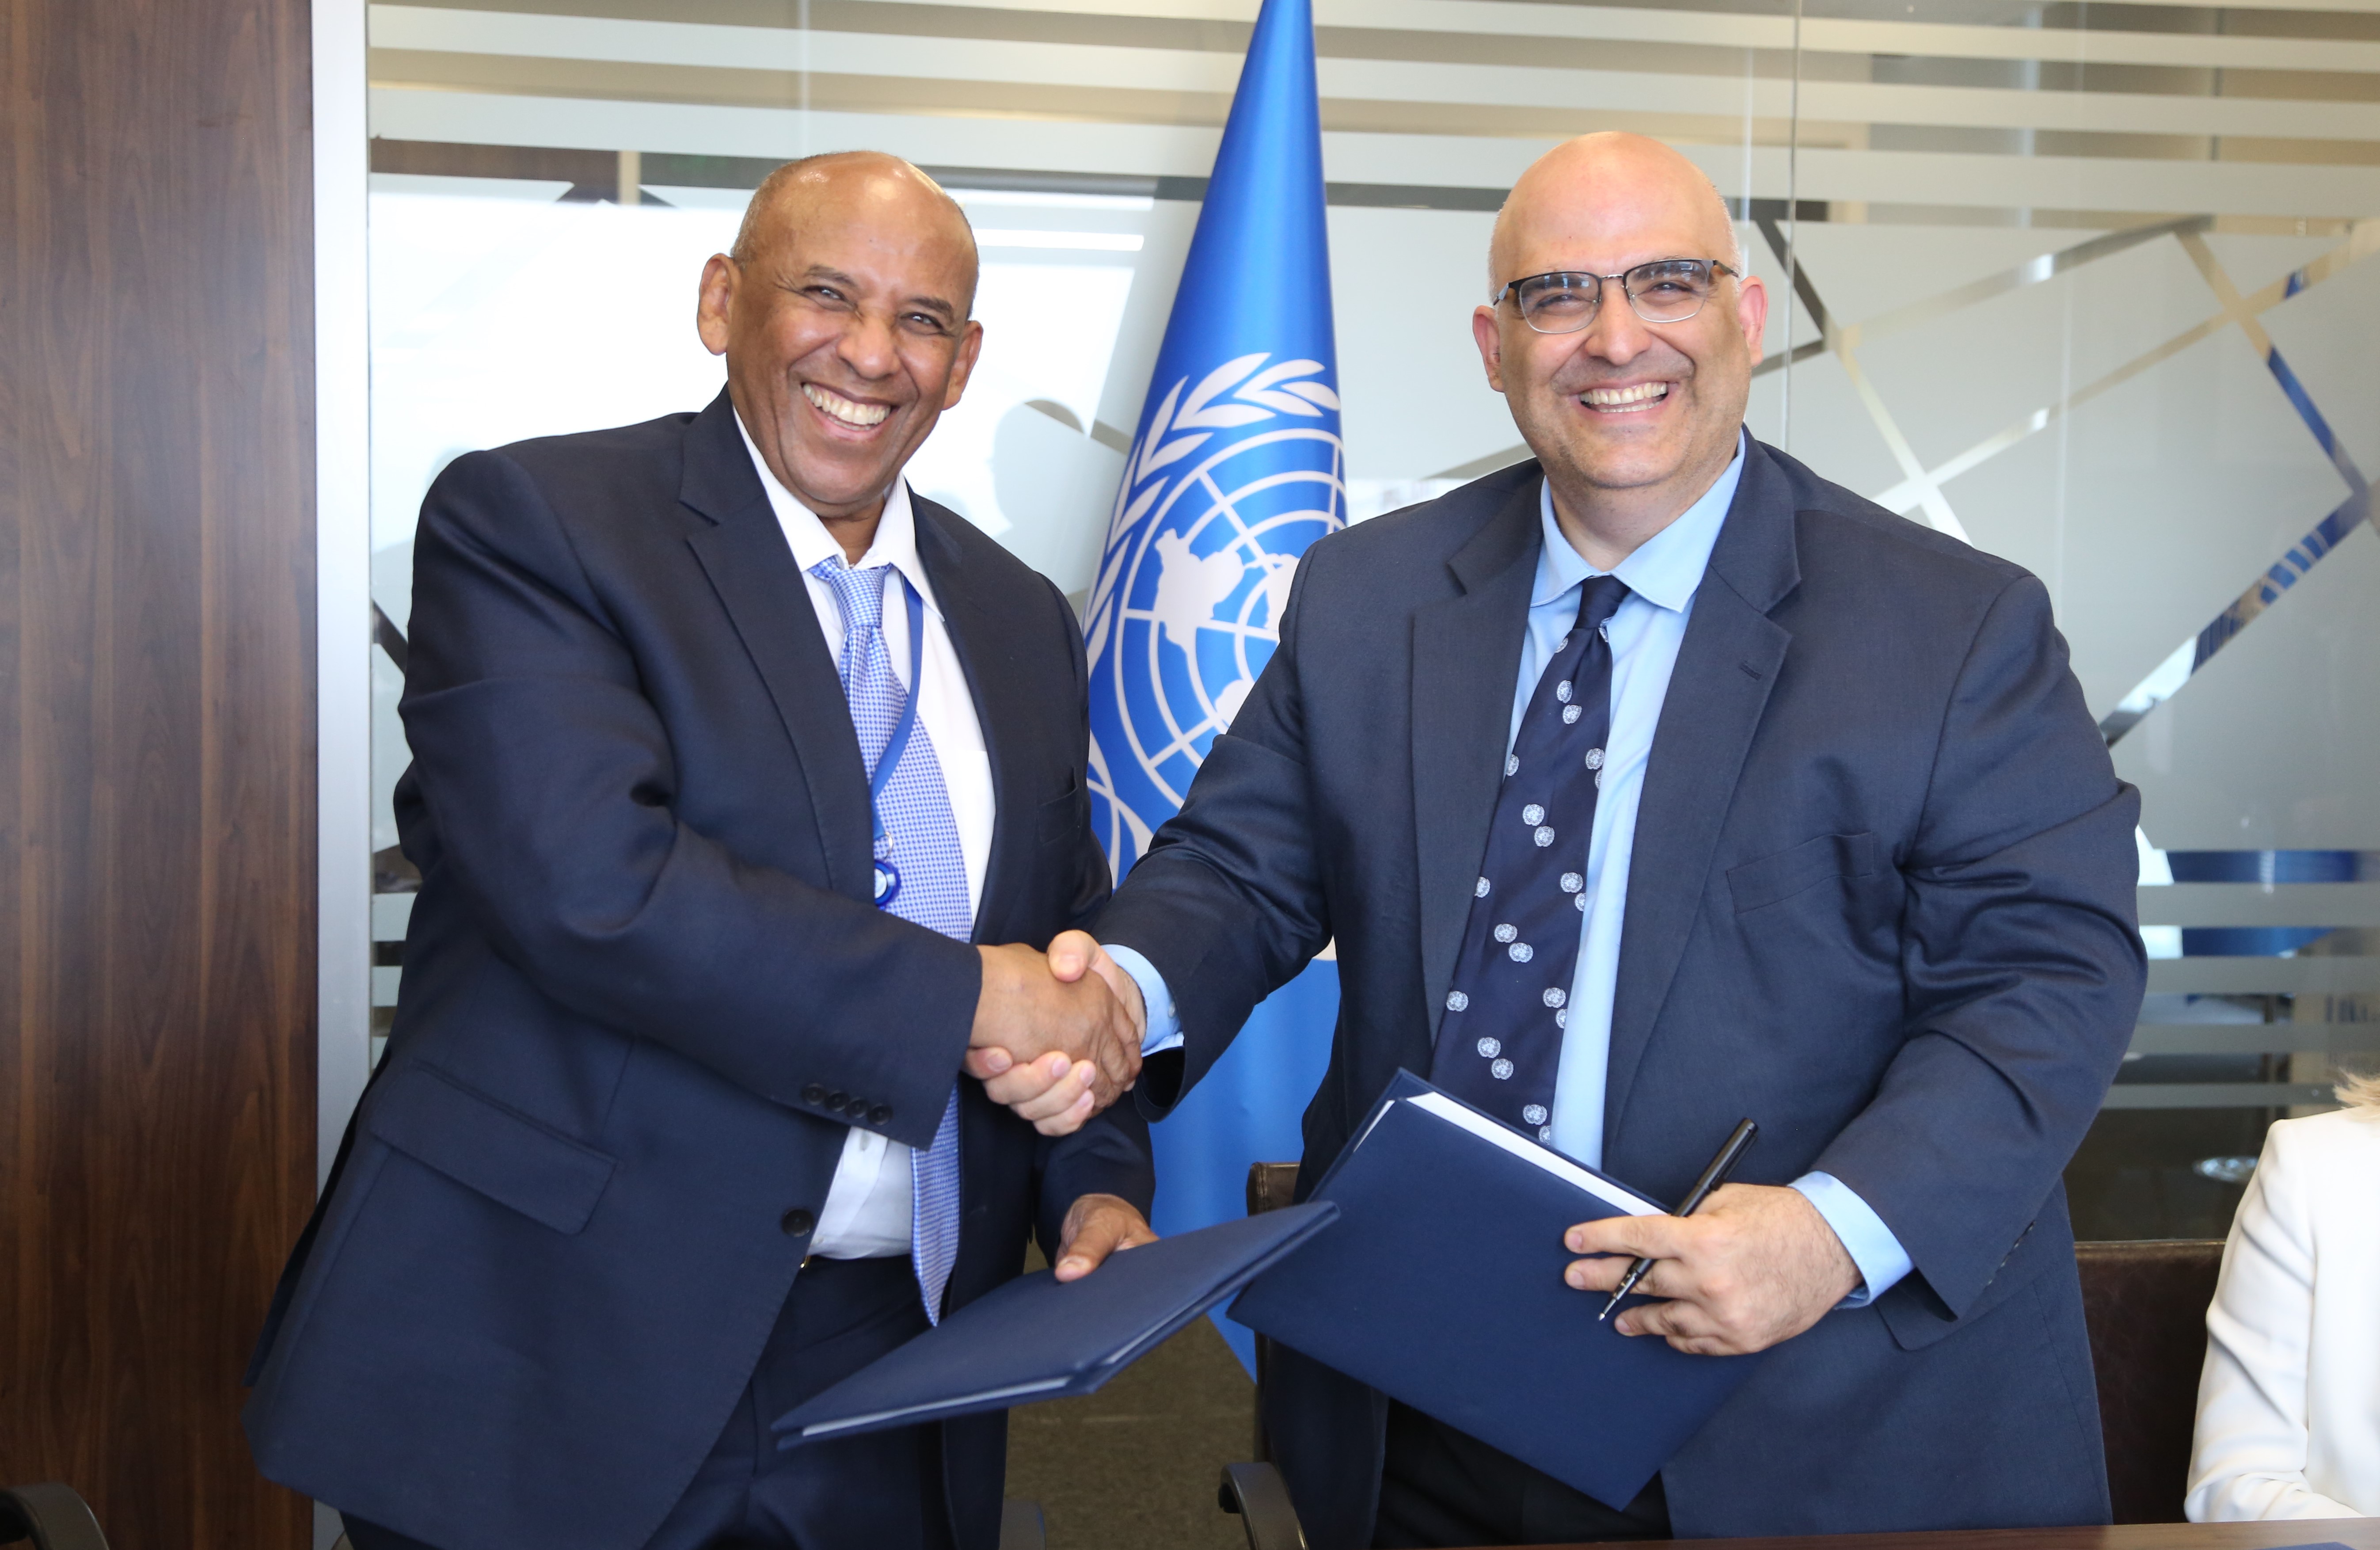 Director of UNDP ICPSD Mr. Sahba Sobhani and the Acting Managing Director of UNTB Dr. Taffere Tesfachew